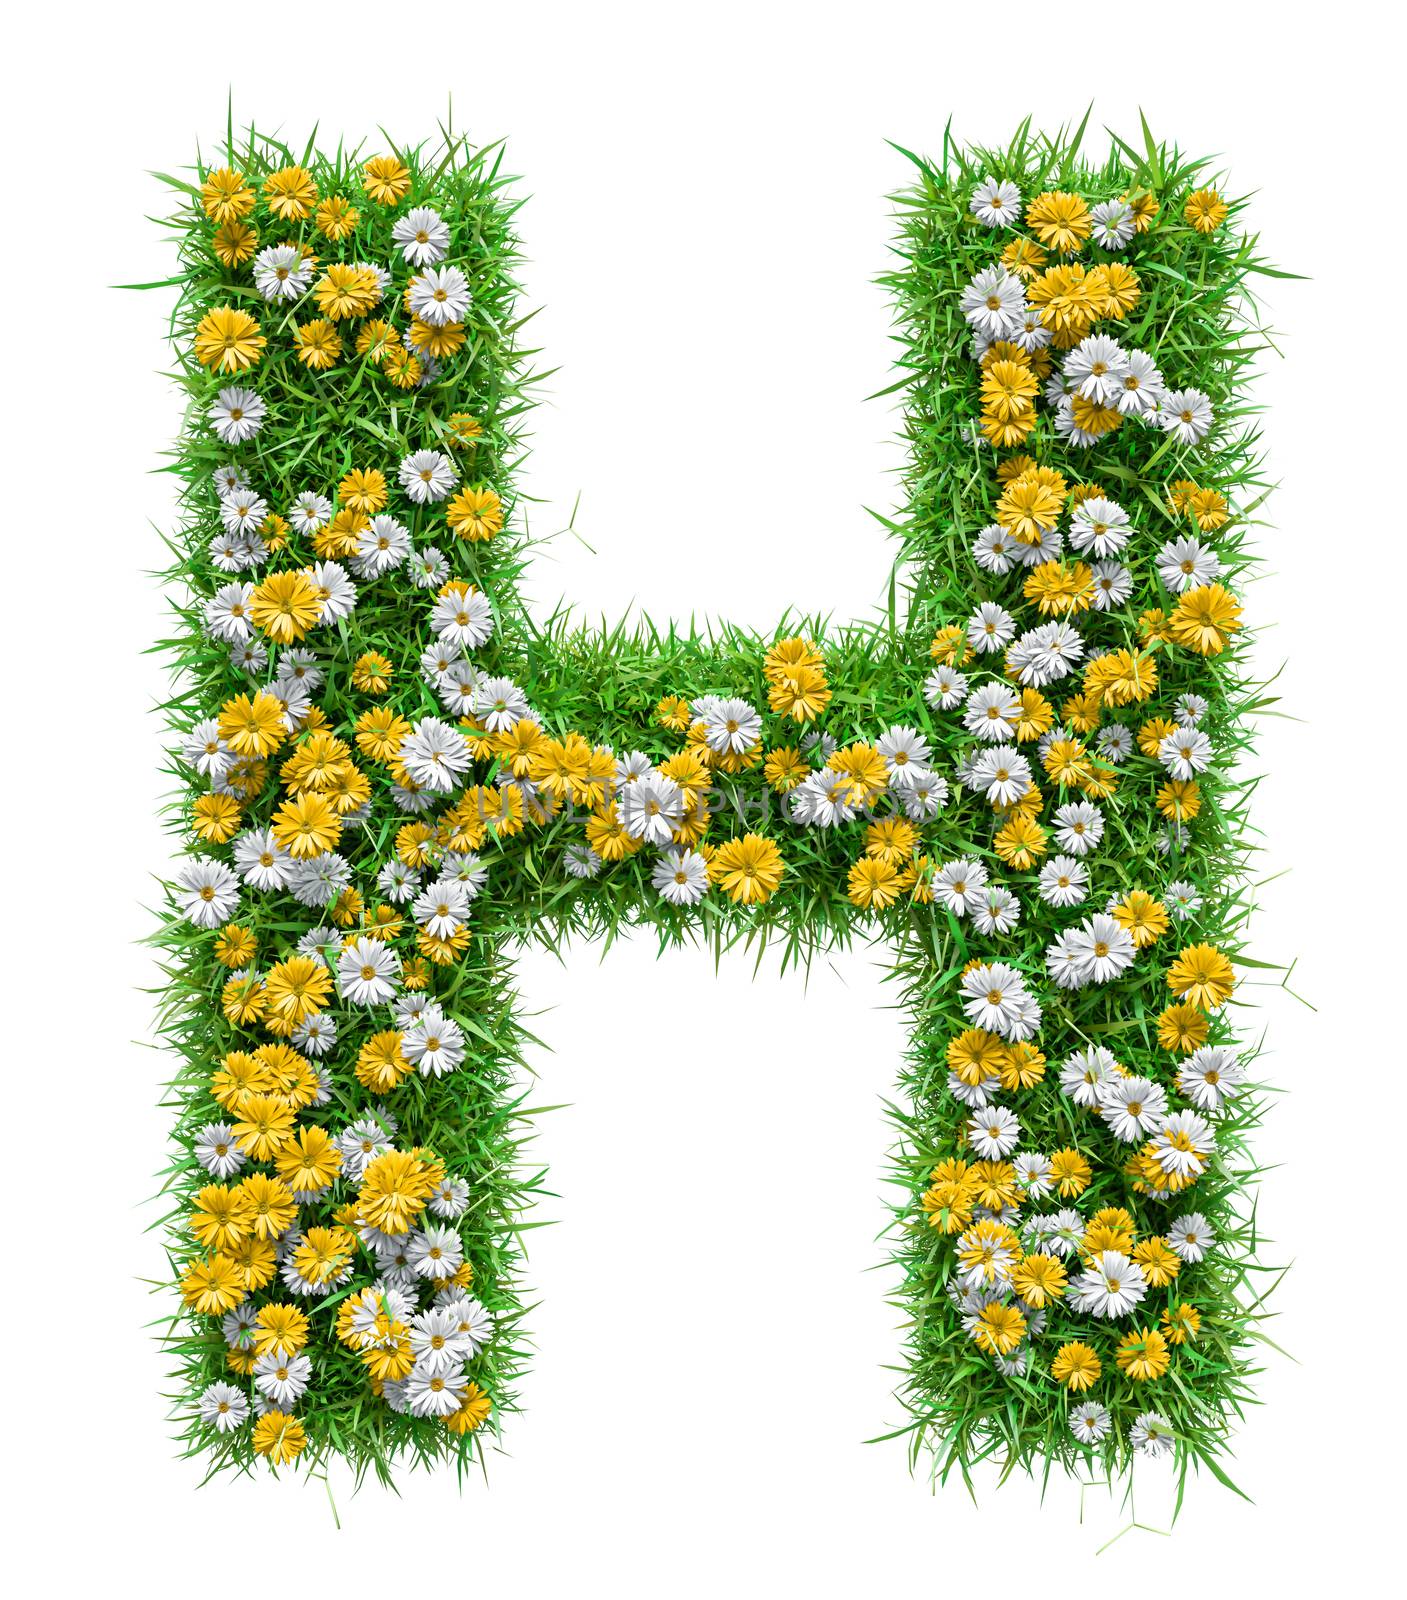 Letter H Of Green Grass And Flowers by cherezoff